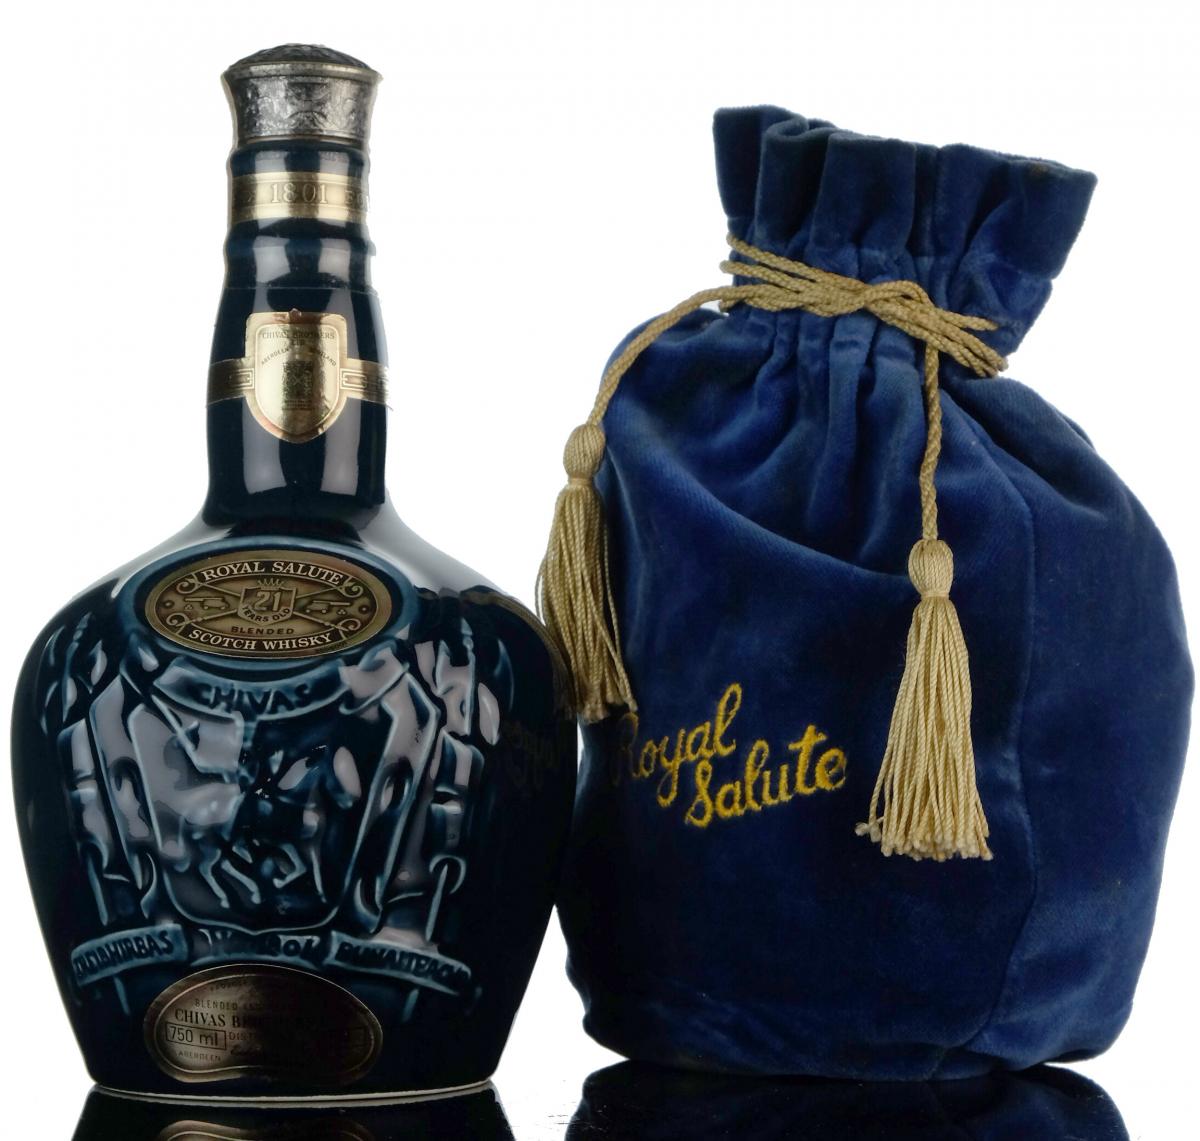 Royal Salute 21 Year Old - Blue Decanter